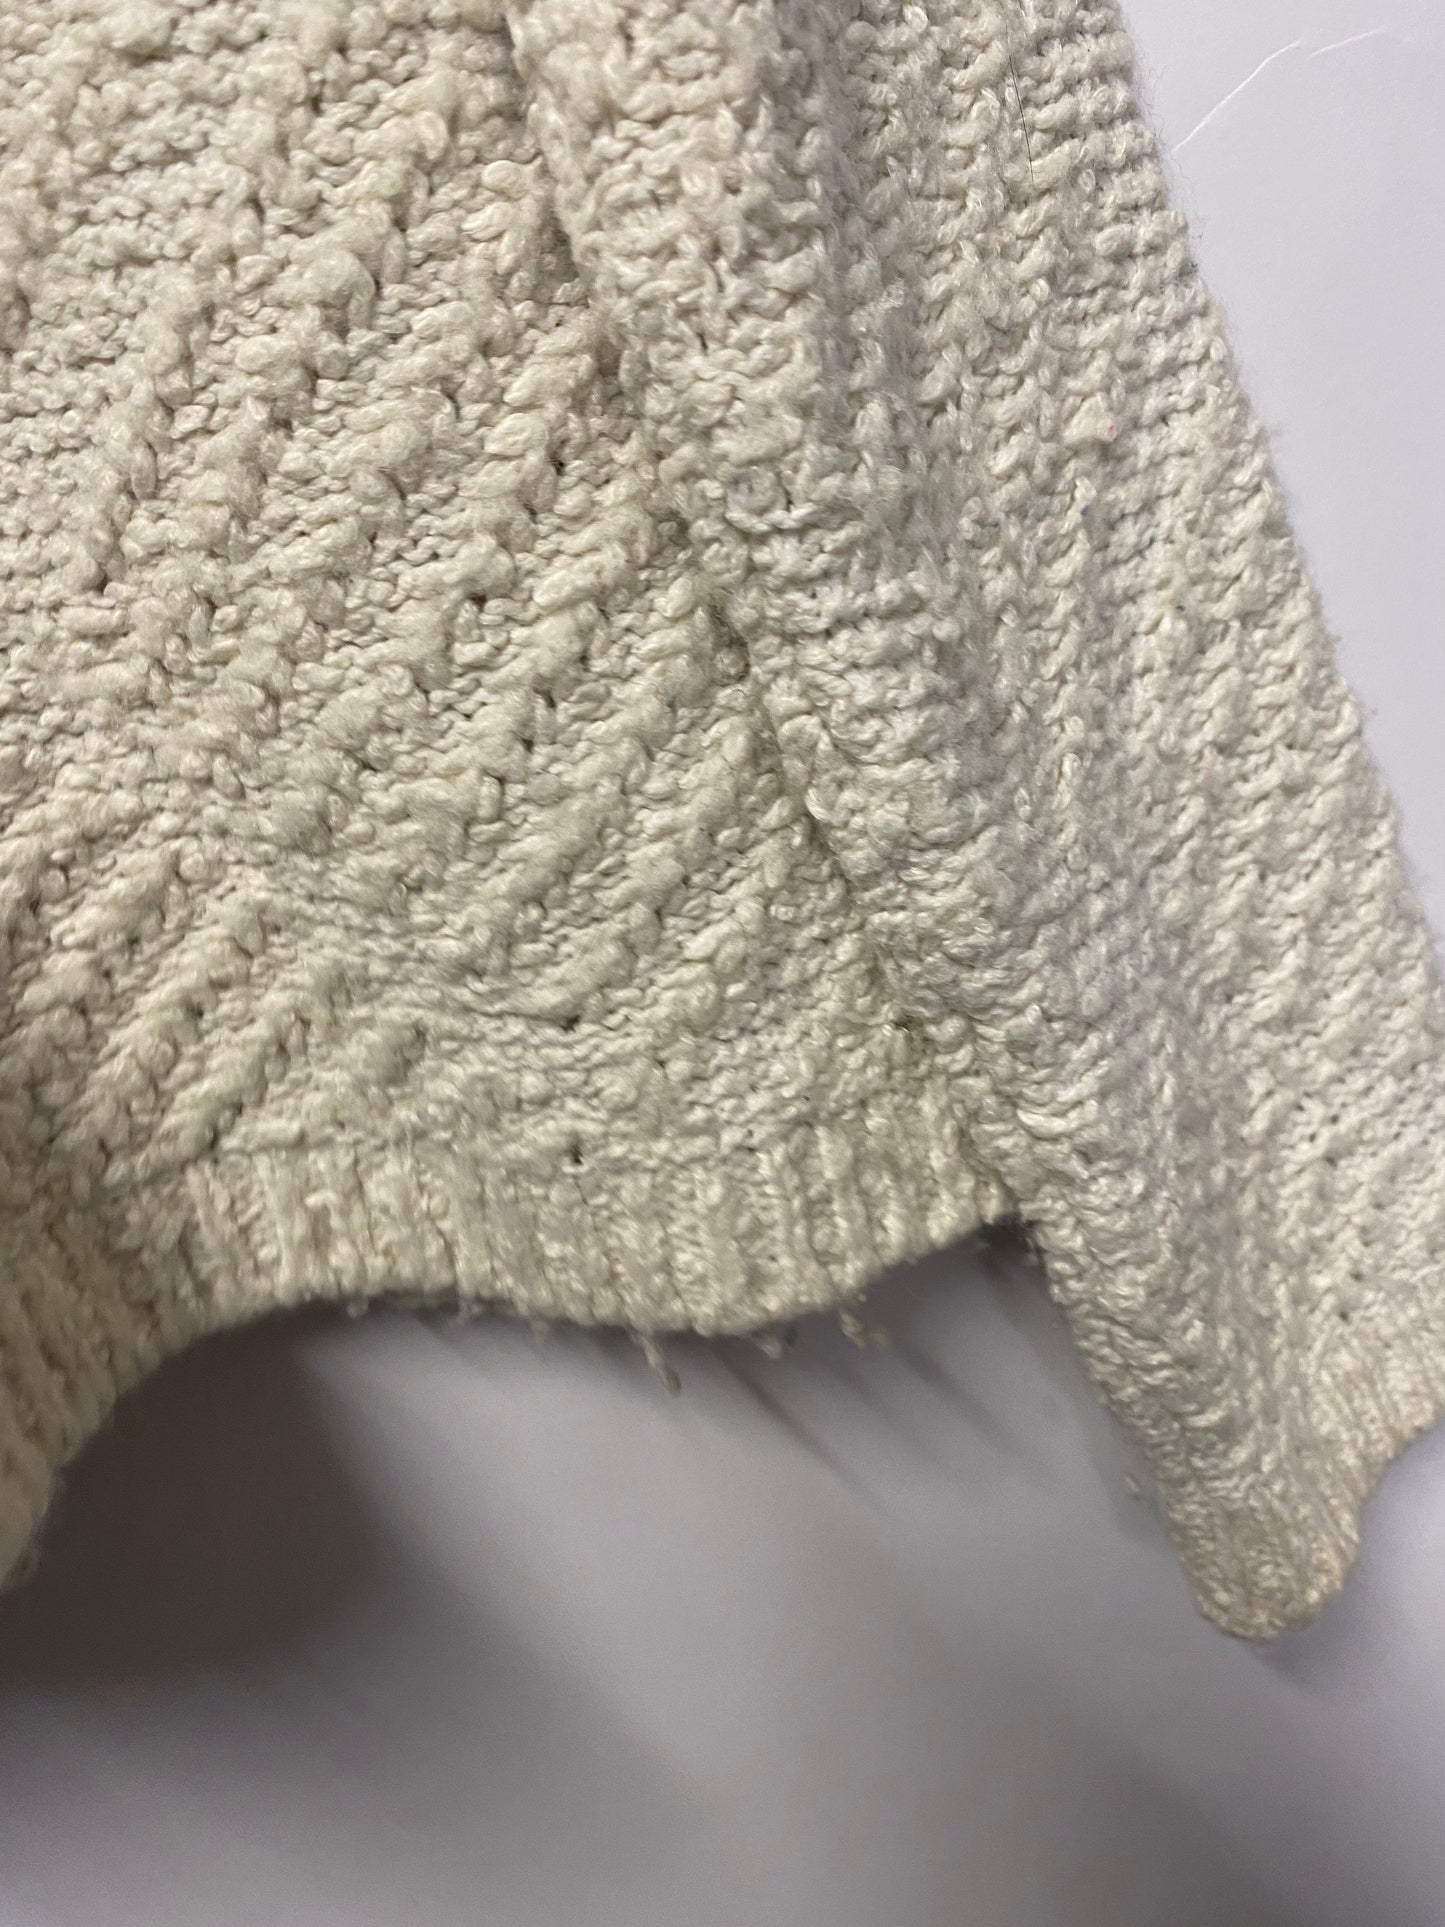 Massimo Dutti Cream Textured Boxy Fit Knitted Jumper Extra Small